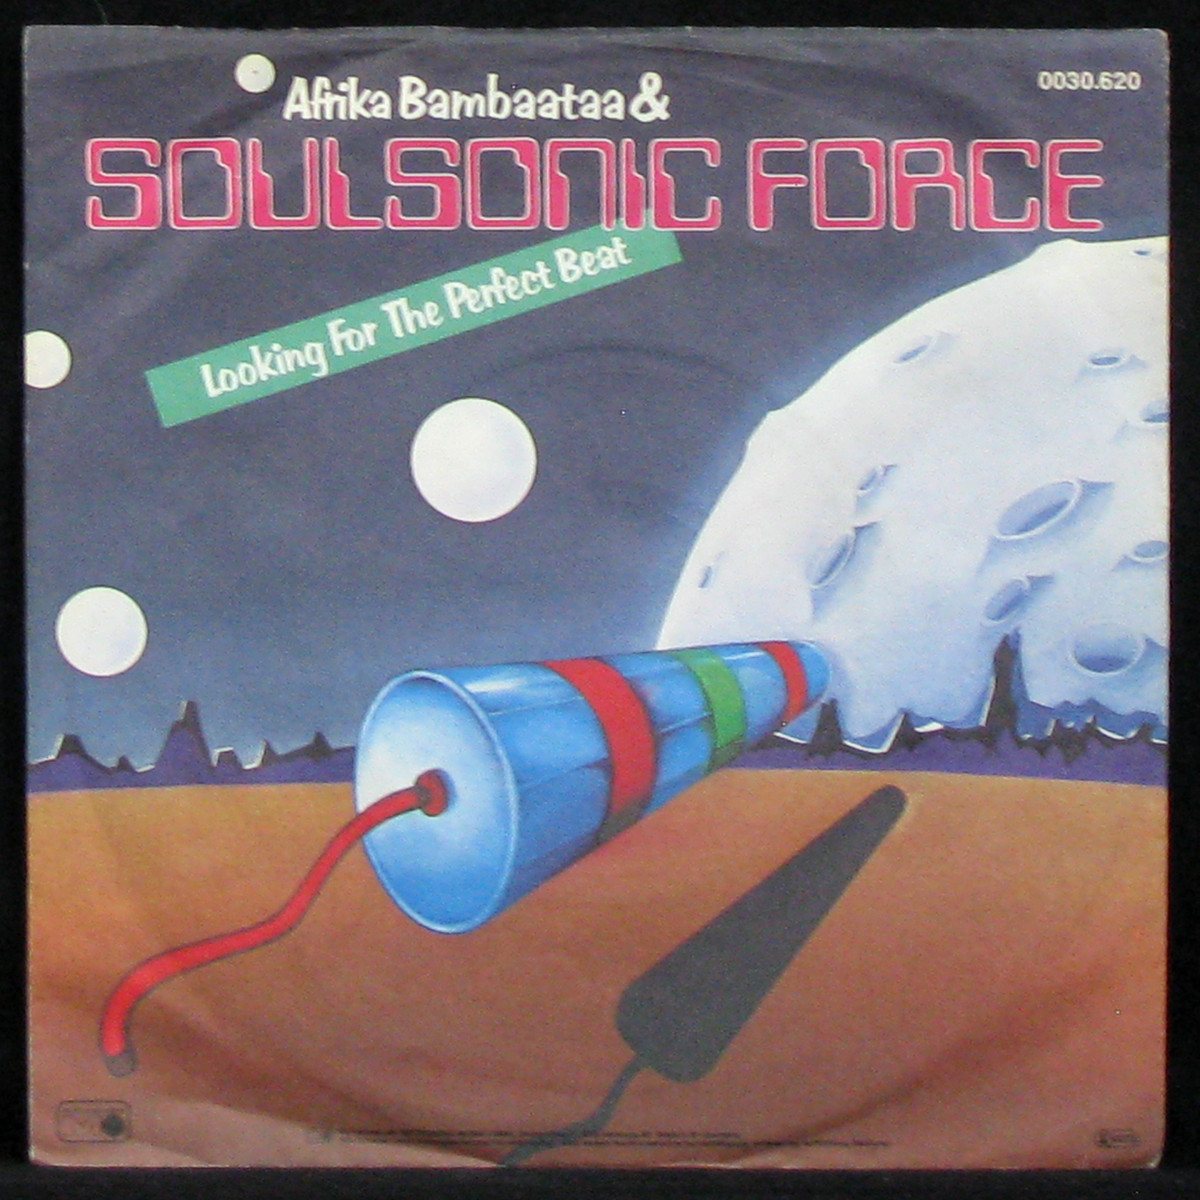 LP Afrika Bambaata & Soulsonic Force — Looking For The Perfect Beat (single) фото